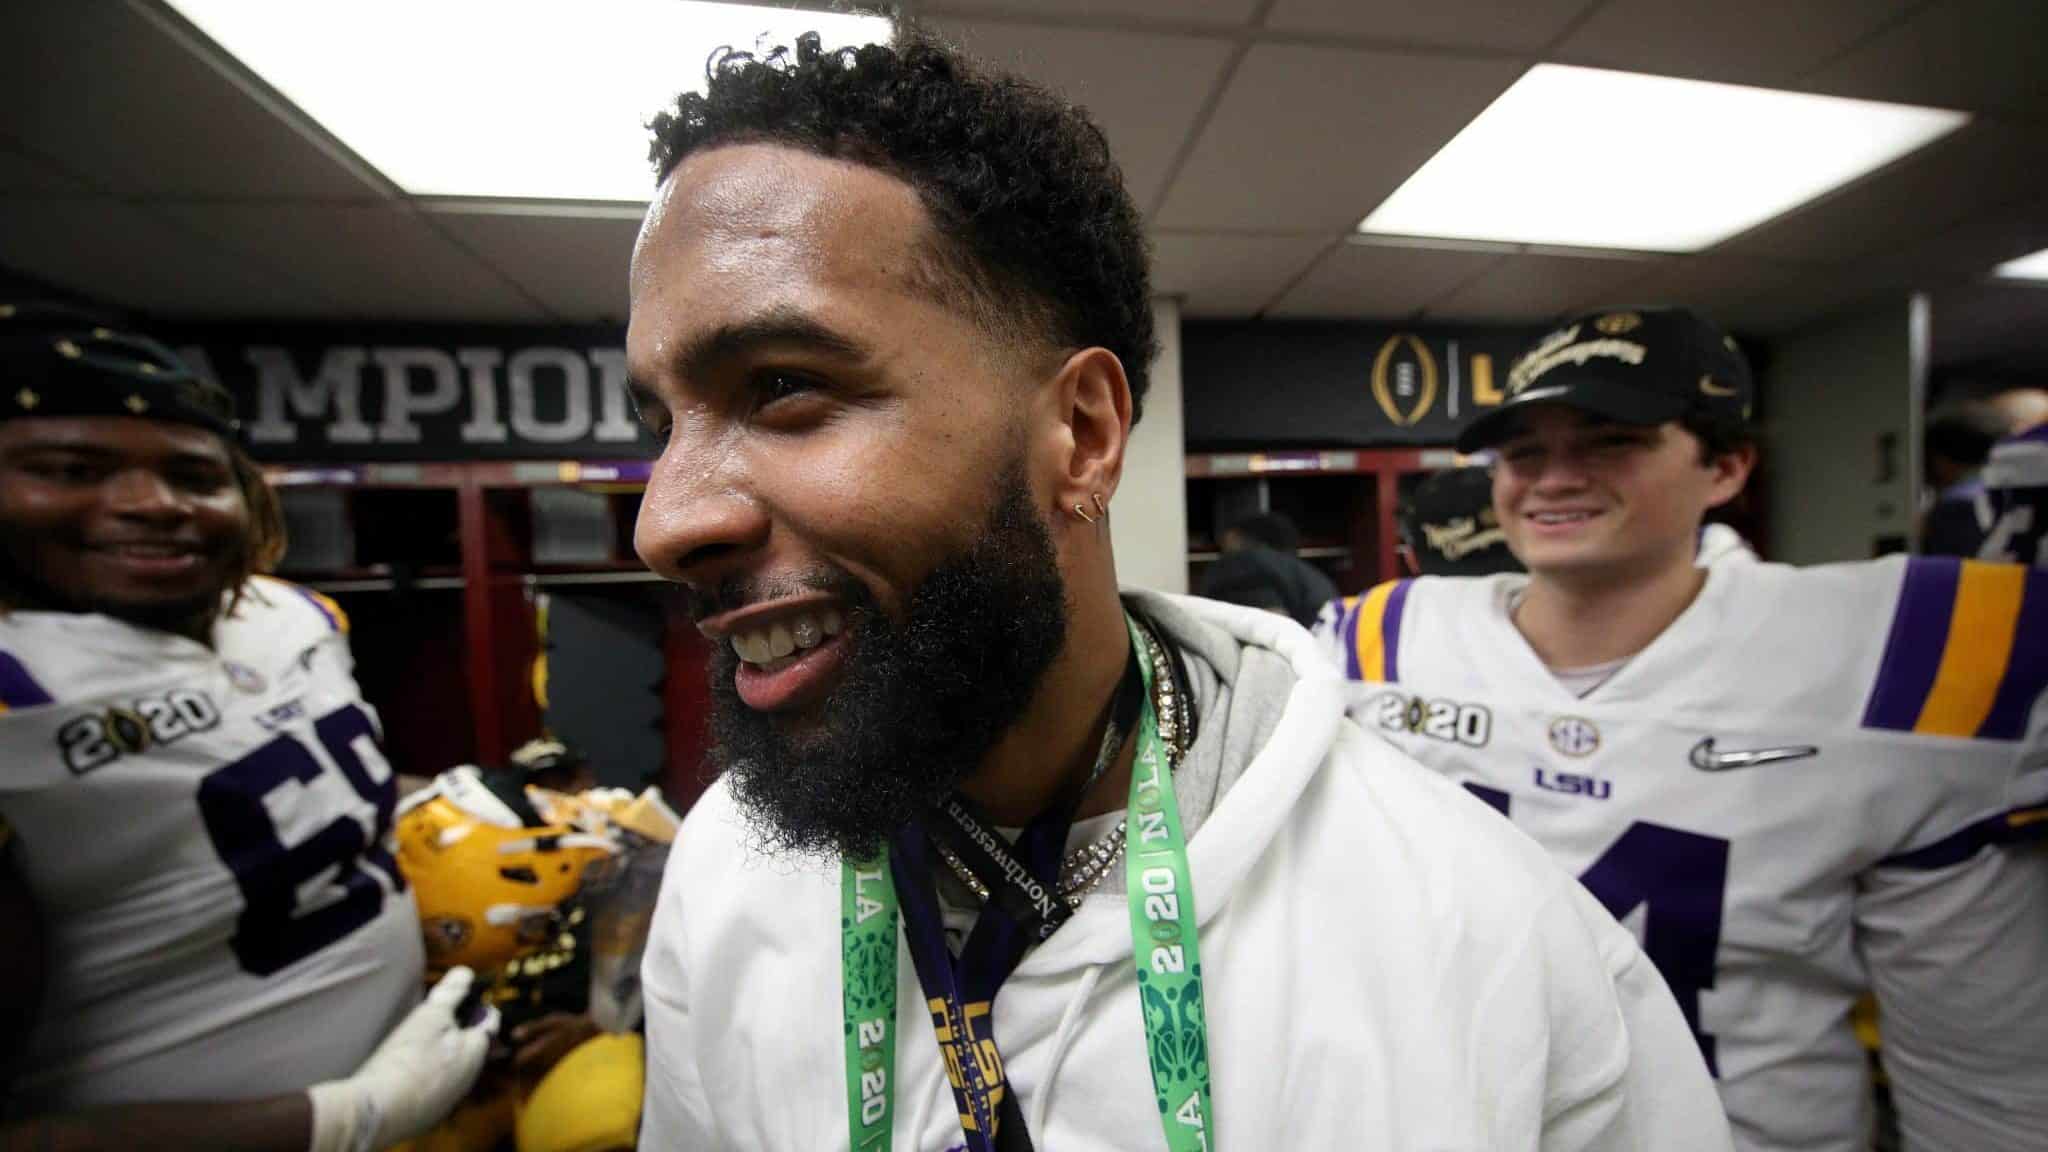 NEW ORLEANS, LOUISIANA - JANUARY 13: Odell Beckham Jr. celebrates in the locker room the LSU Tigers after their 42-25 win over Clemson Tigers in the College Football Playoff National Championship game at Mercedes Benz Superdome on January 13, 2020 in New Orleans, Louisiana.